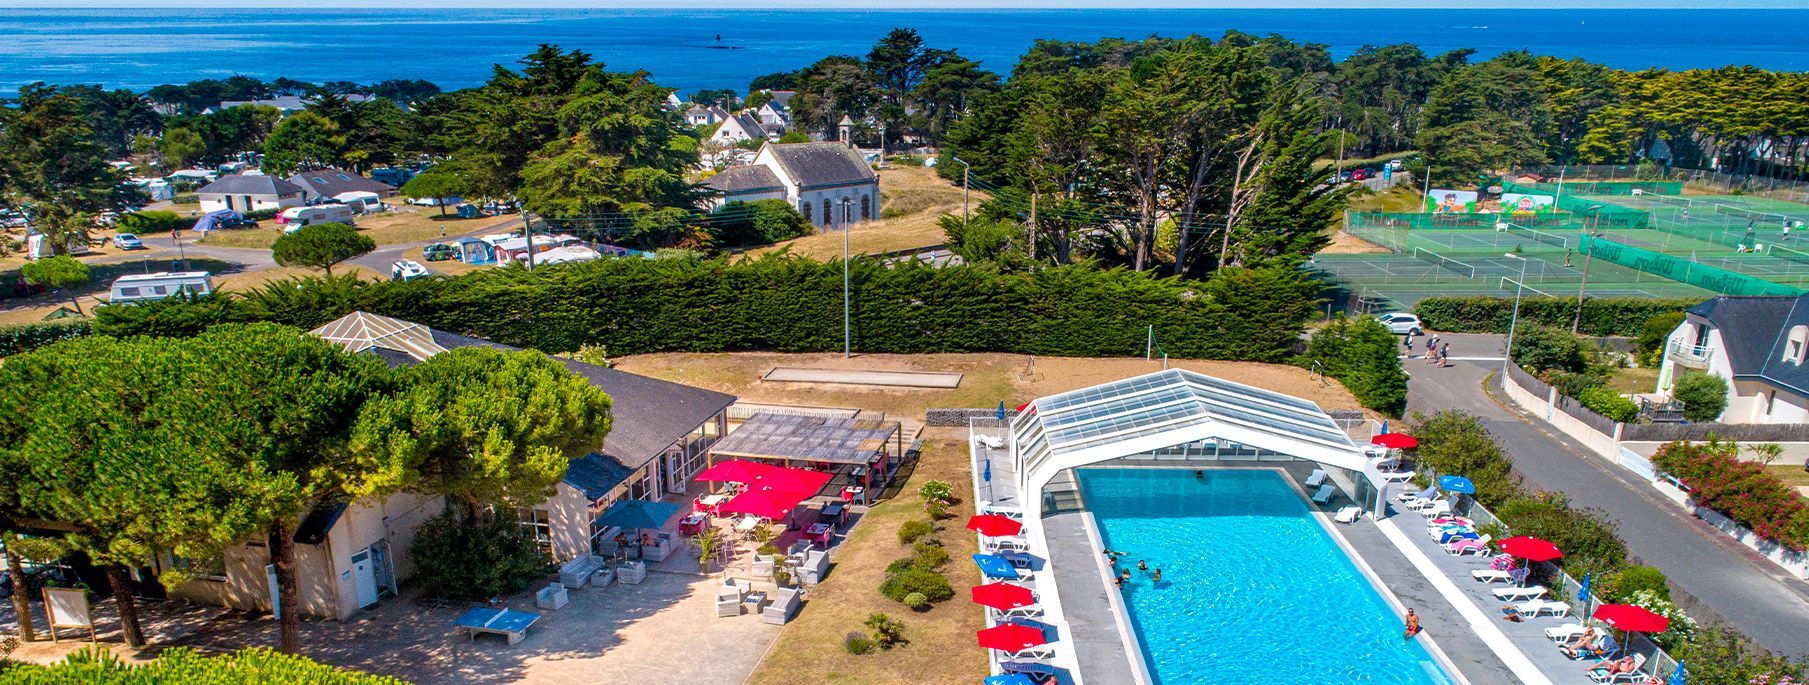 Camping Le Bois d'Amour – Fall for the charm of Morbihan